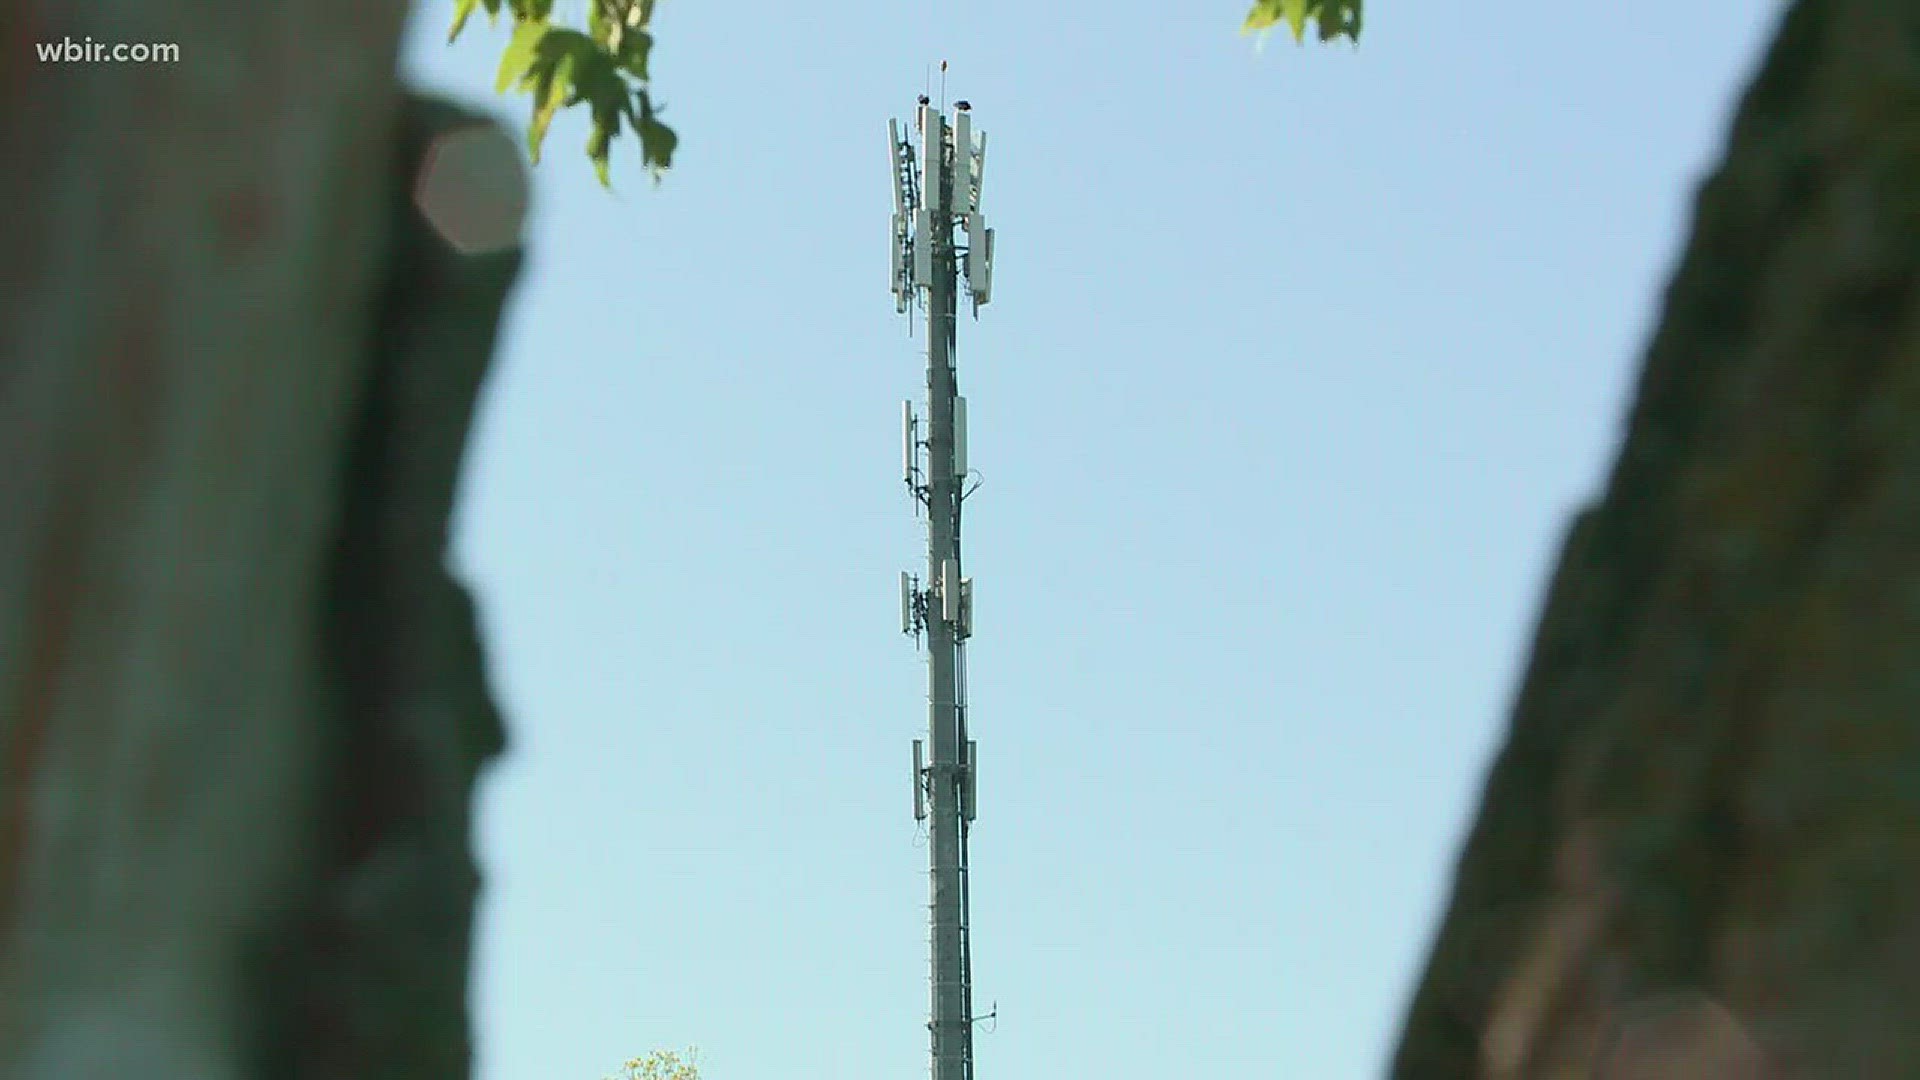 Nov. 13, 2017: The Knox County Commission is ready to adopt new rules to control the building of new cellular towers.